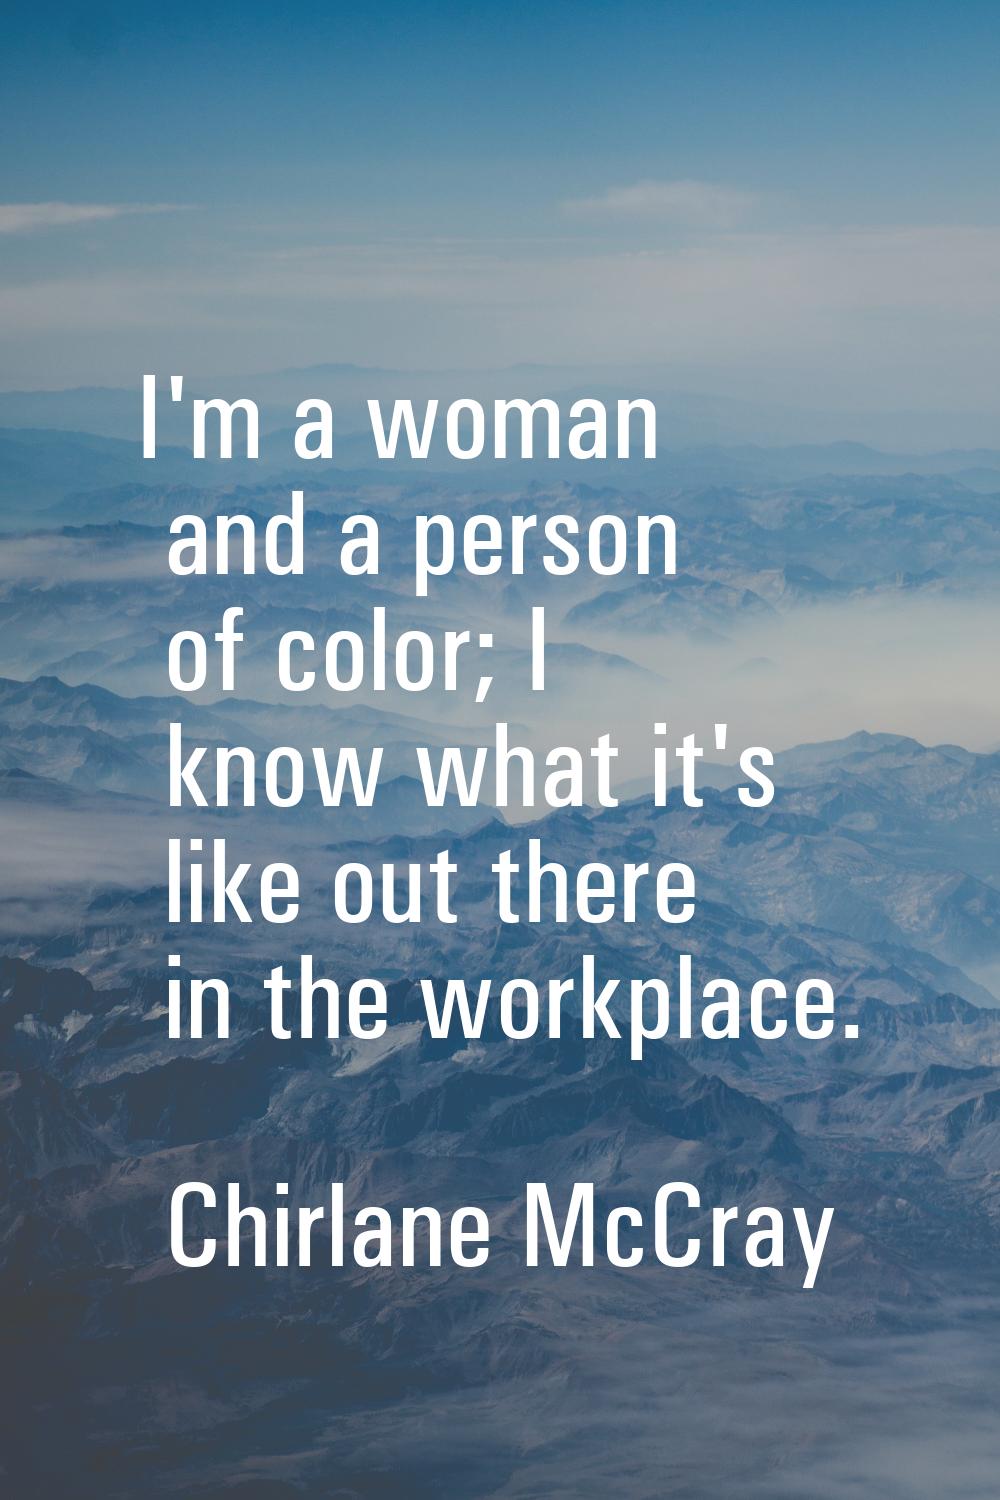 I'm a woman and a person of color; I know what it's like out there in the workplace.